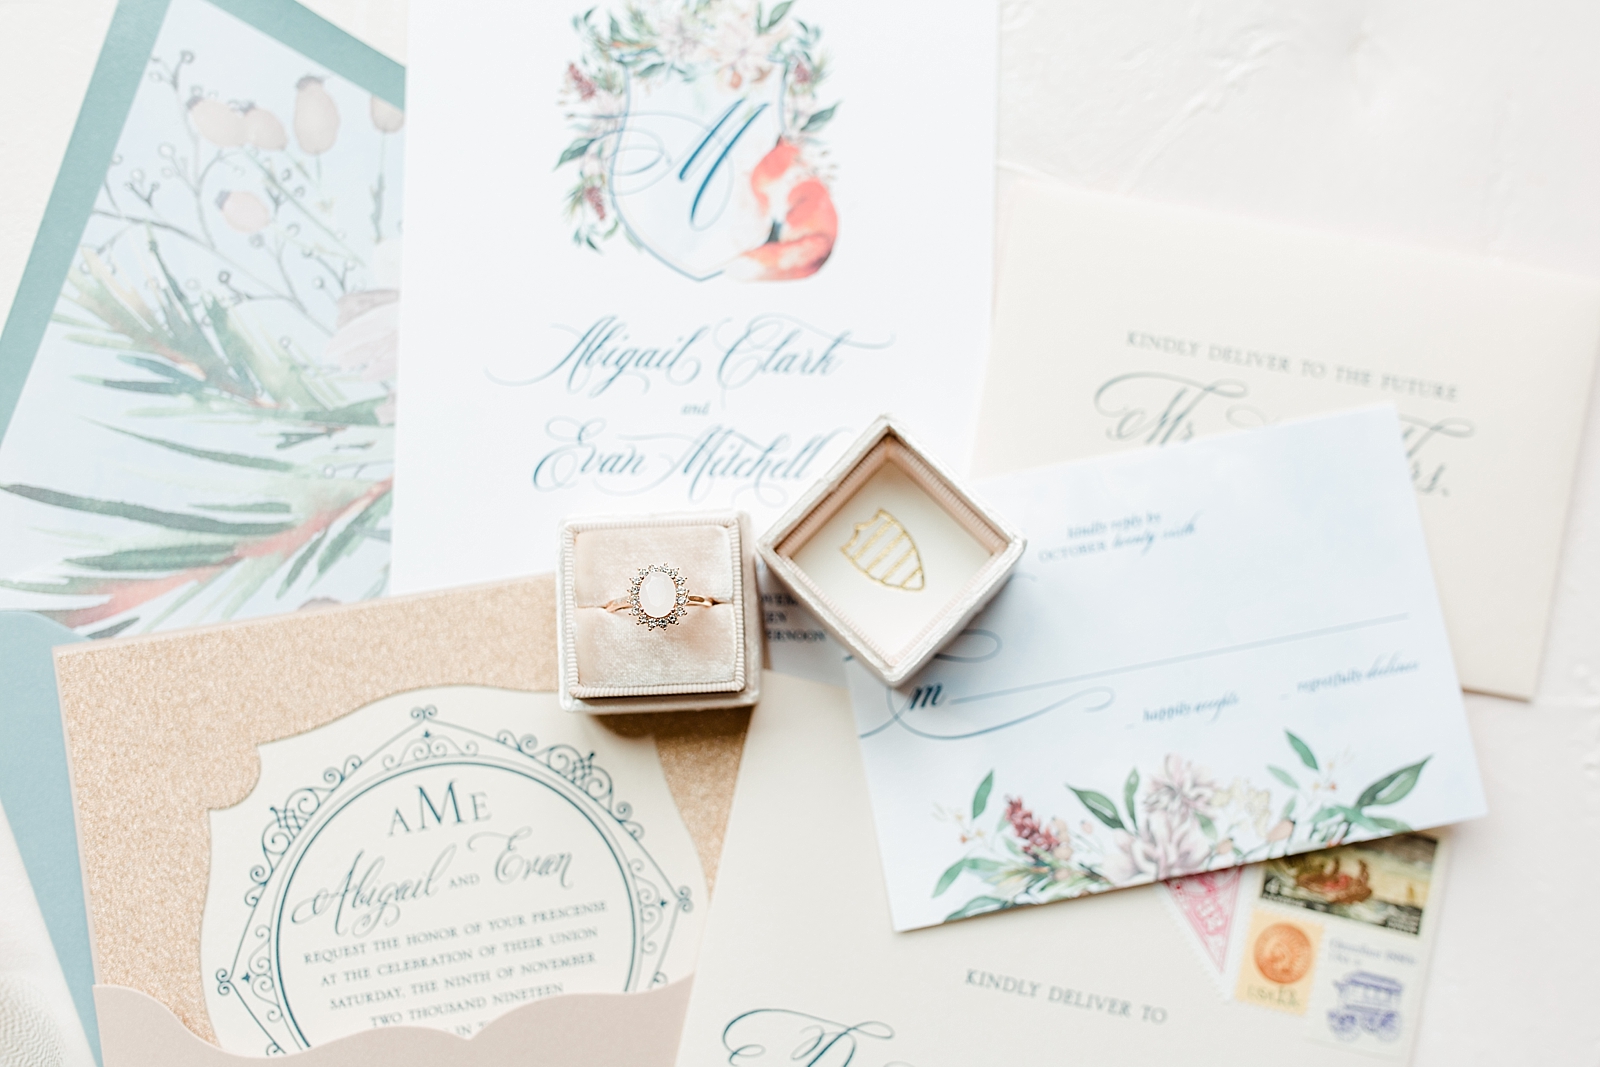 Juliette Chapel Wedding Invitation Suite and engagement ring Photo